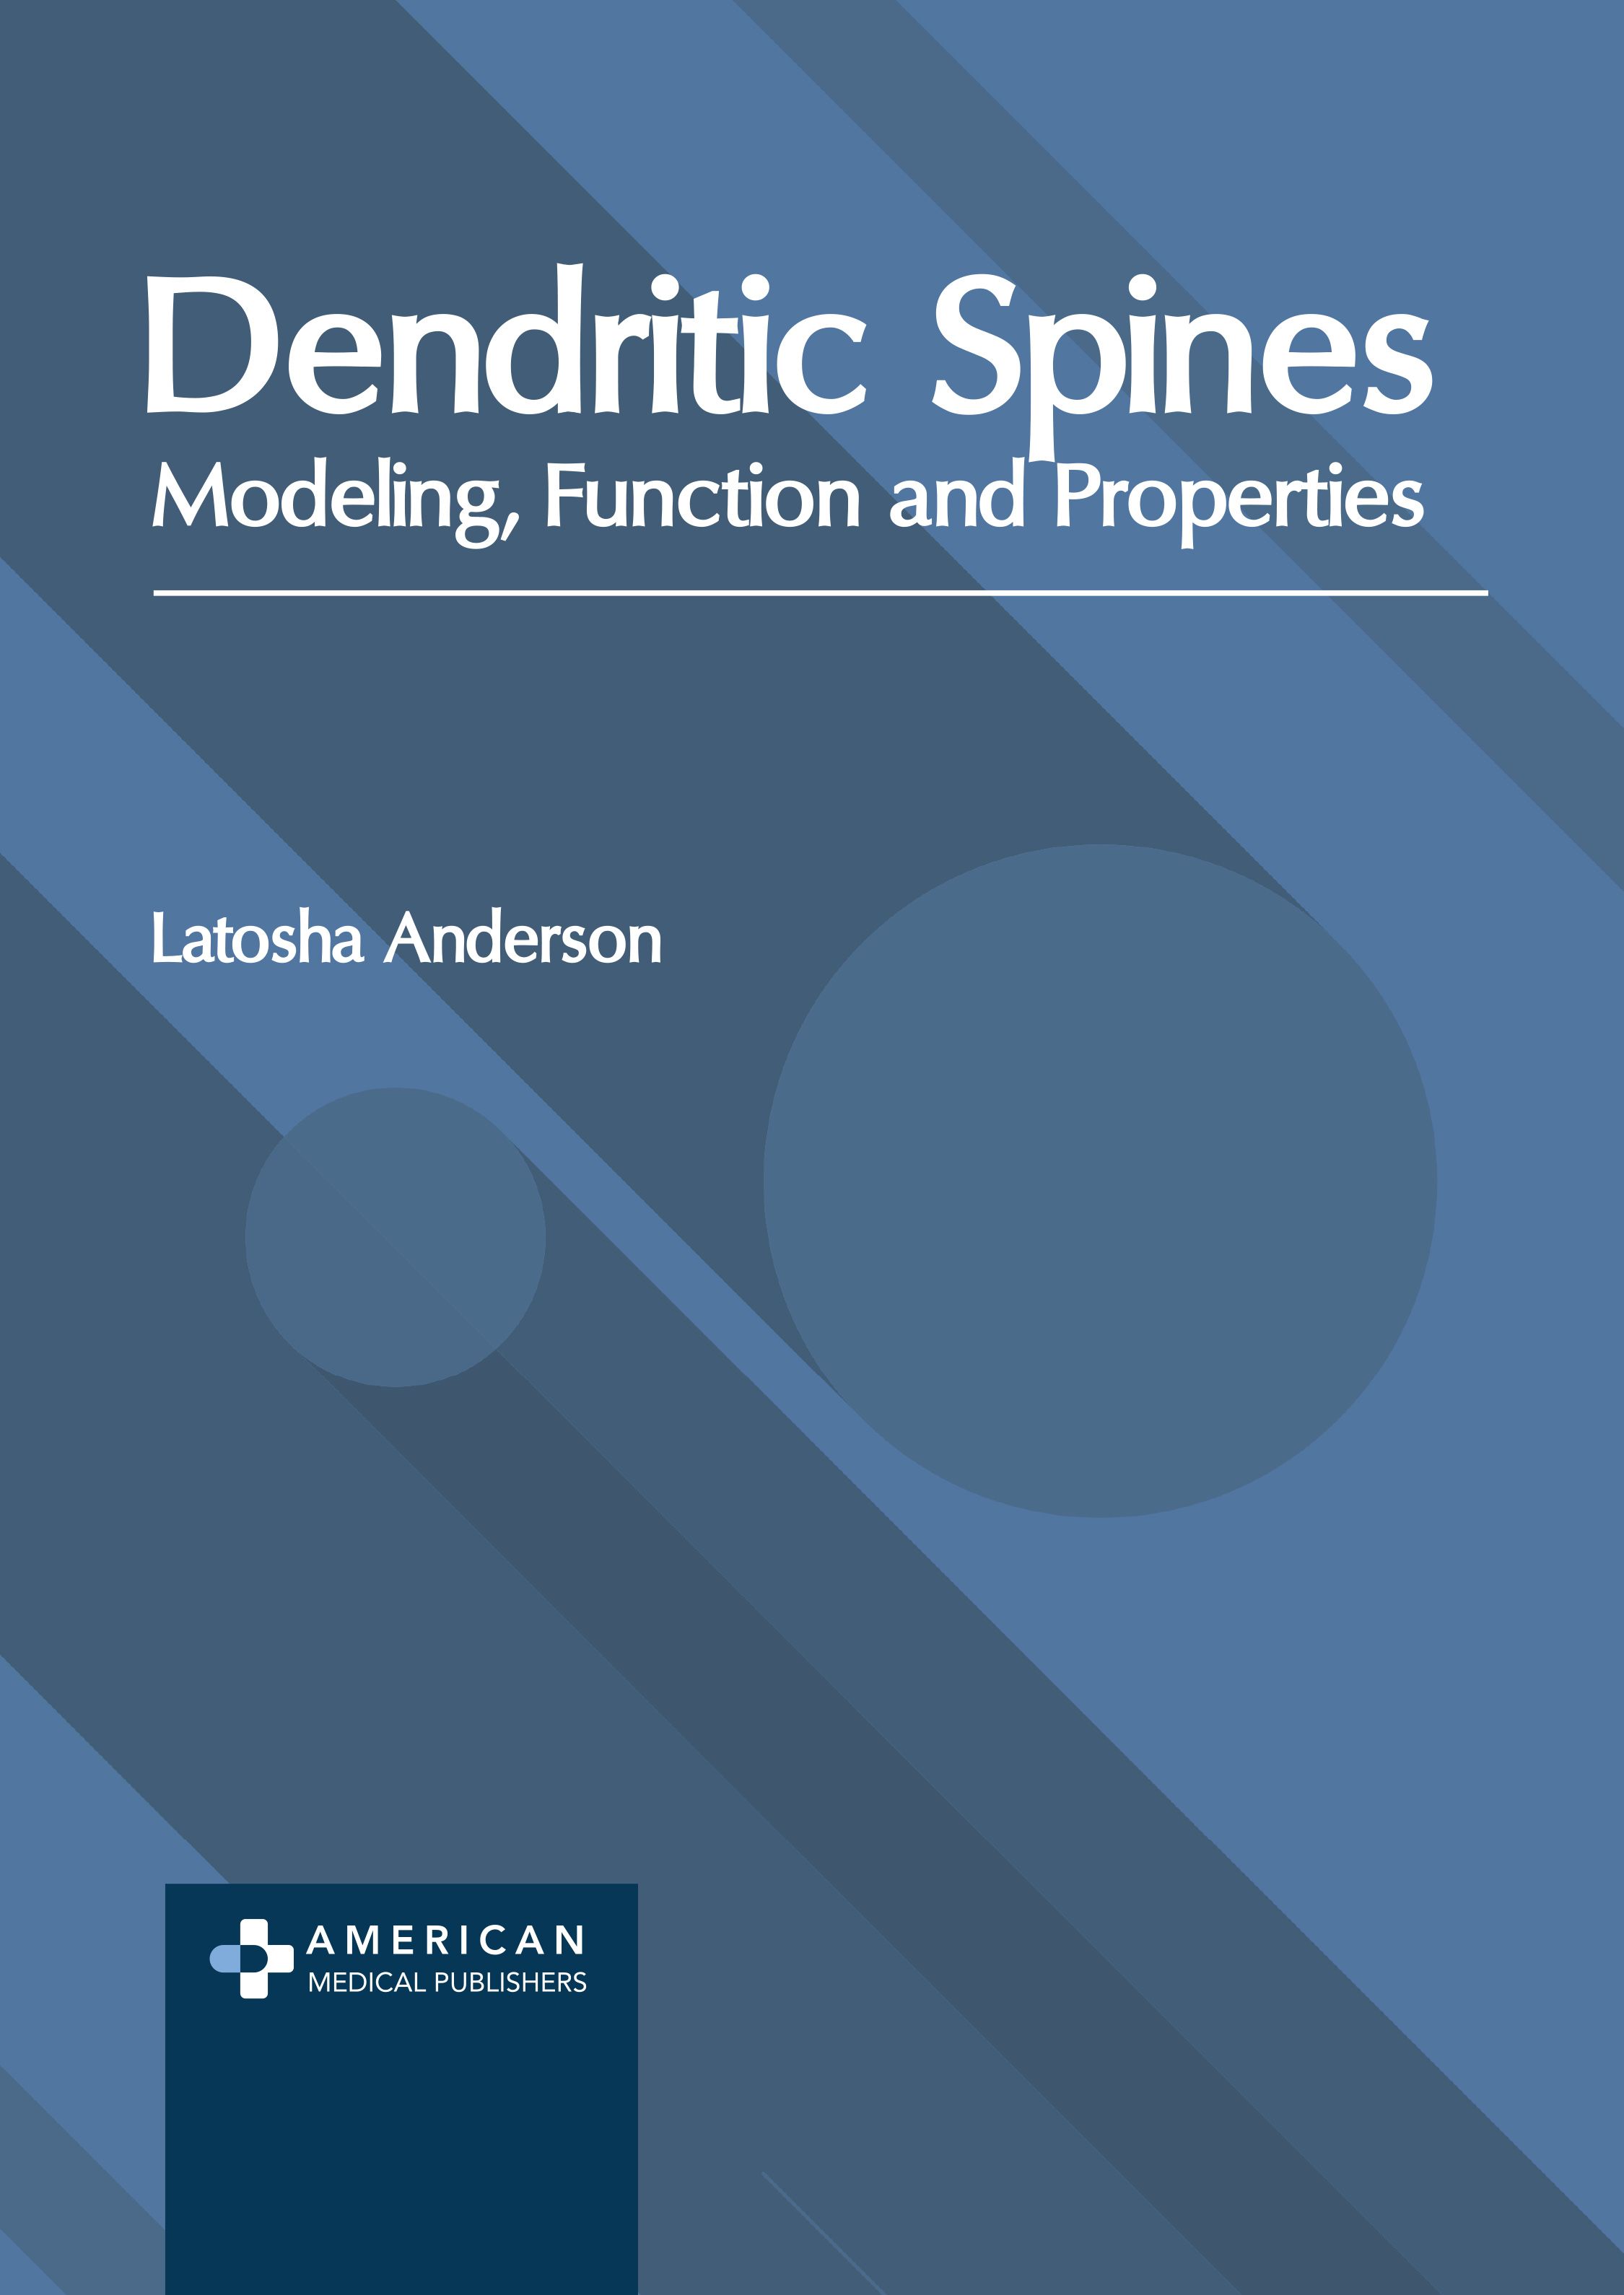 DENDRITIC SPINES: MODELING, FUNCTION AND PROPERTIES